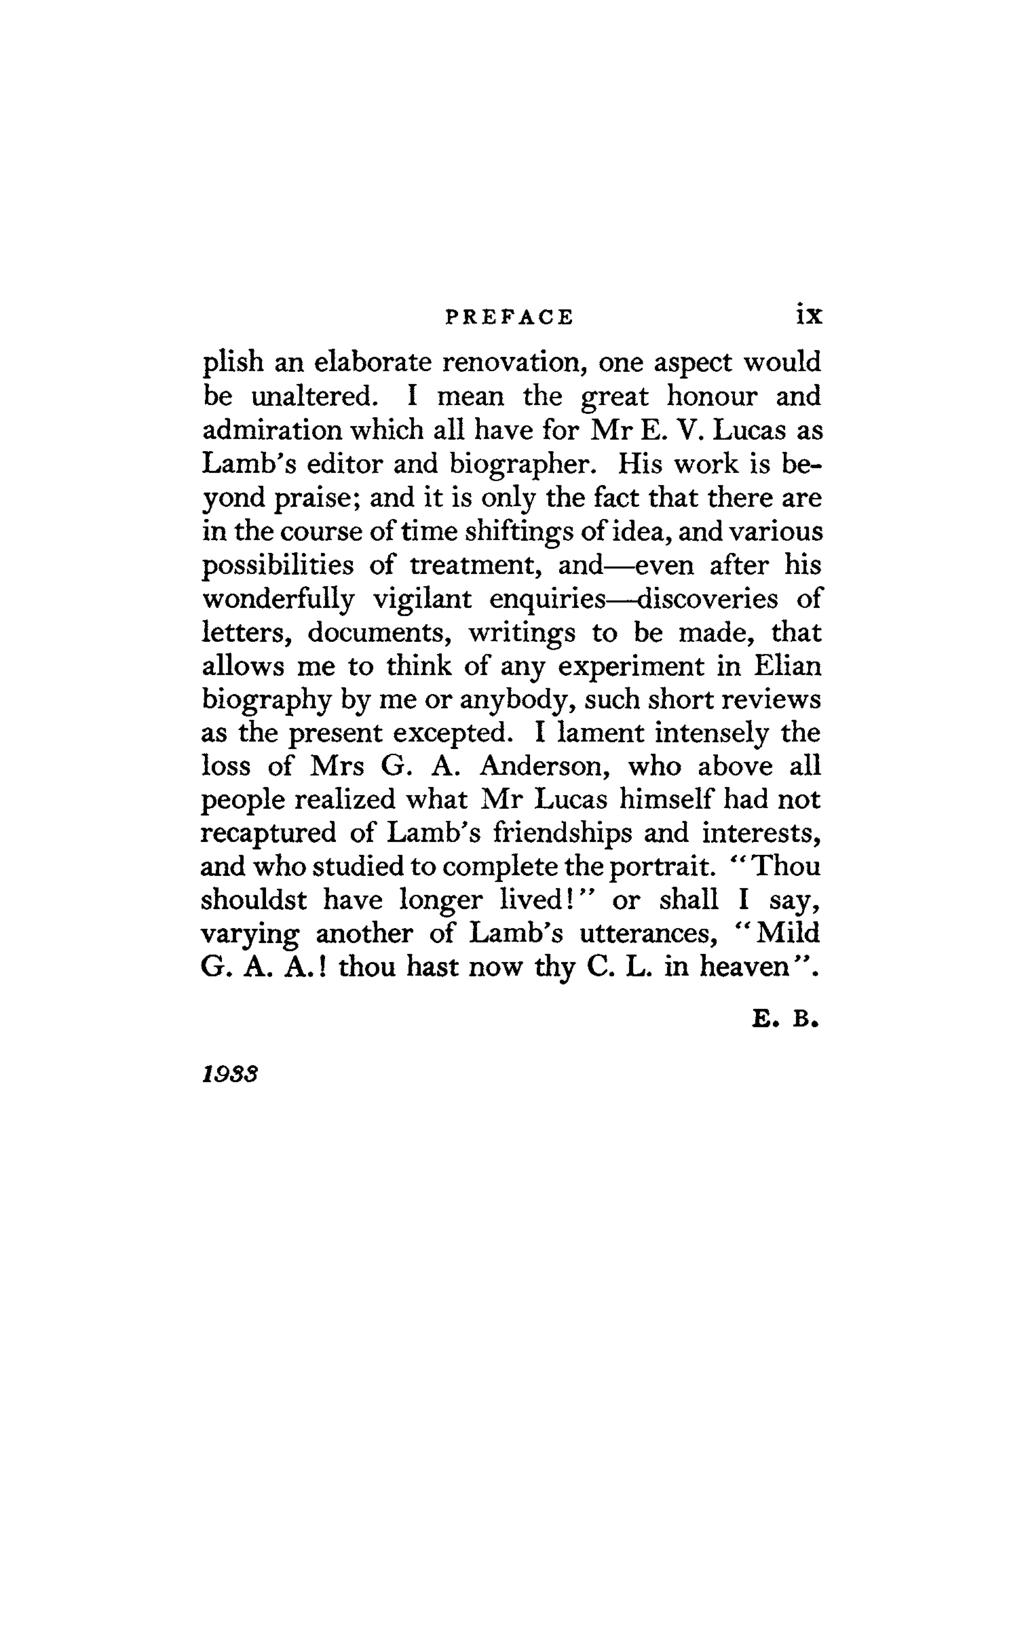 PREFACE plish an elaborate renovation, one aspect would be unaltered. I mean the great honour and admiration which all have for Mr E. V. Lucas as Lamb's editor and biographer.